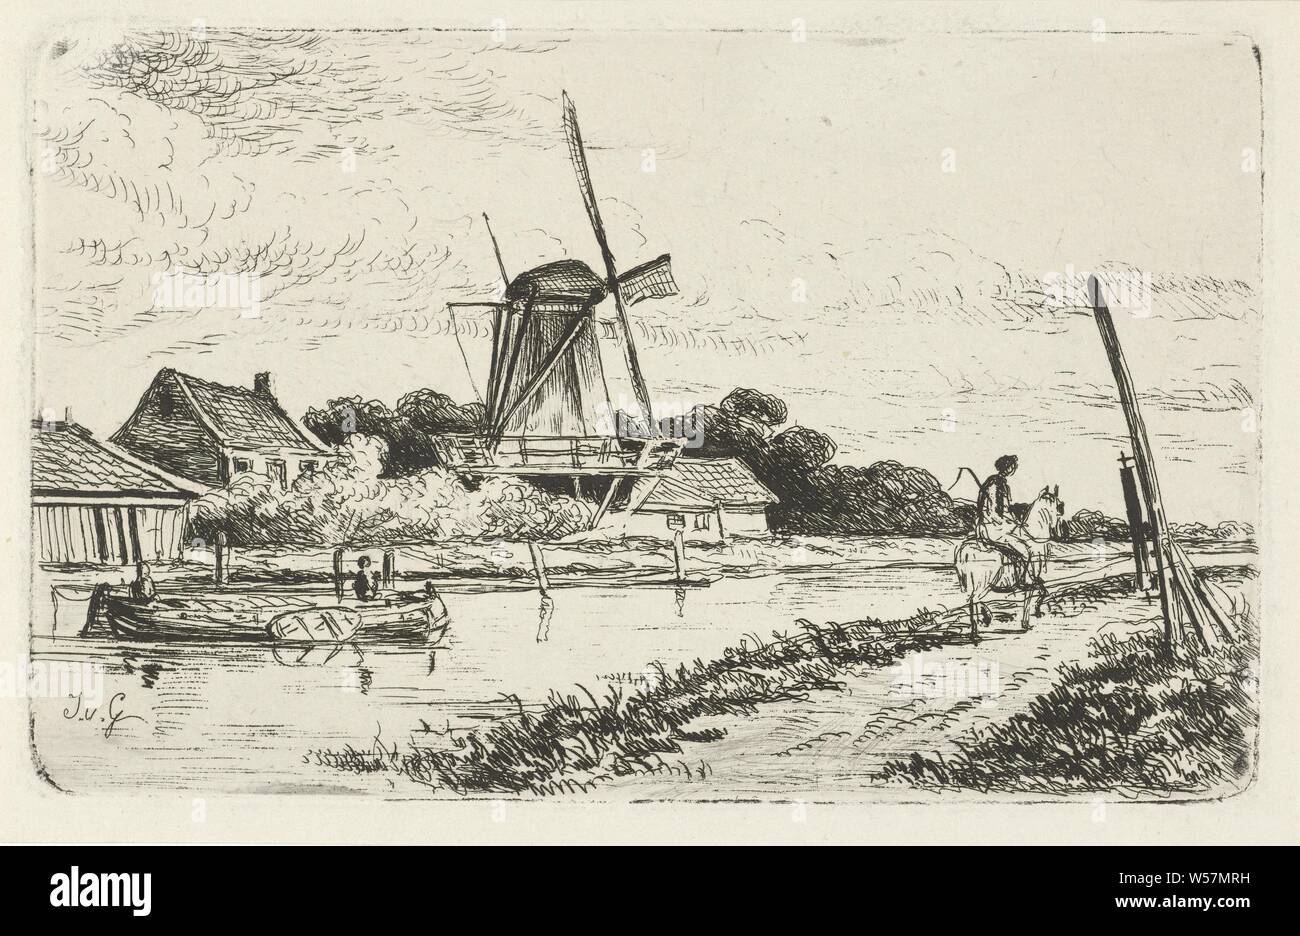 Landscape with a canal and a windmill, Landscape with a road that runs along a canal. A horseman on the road. In the background a windmill, canal (landscape with figures, staffage), windmill in landscape, Jacobus van Gorkom jr. (mentioned on object), Rotterdam, 1837 - 1880, paper, etching, w 157 mm × h 99 mm Stock Photo